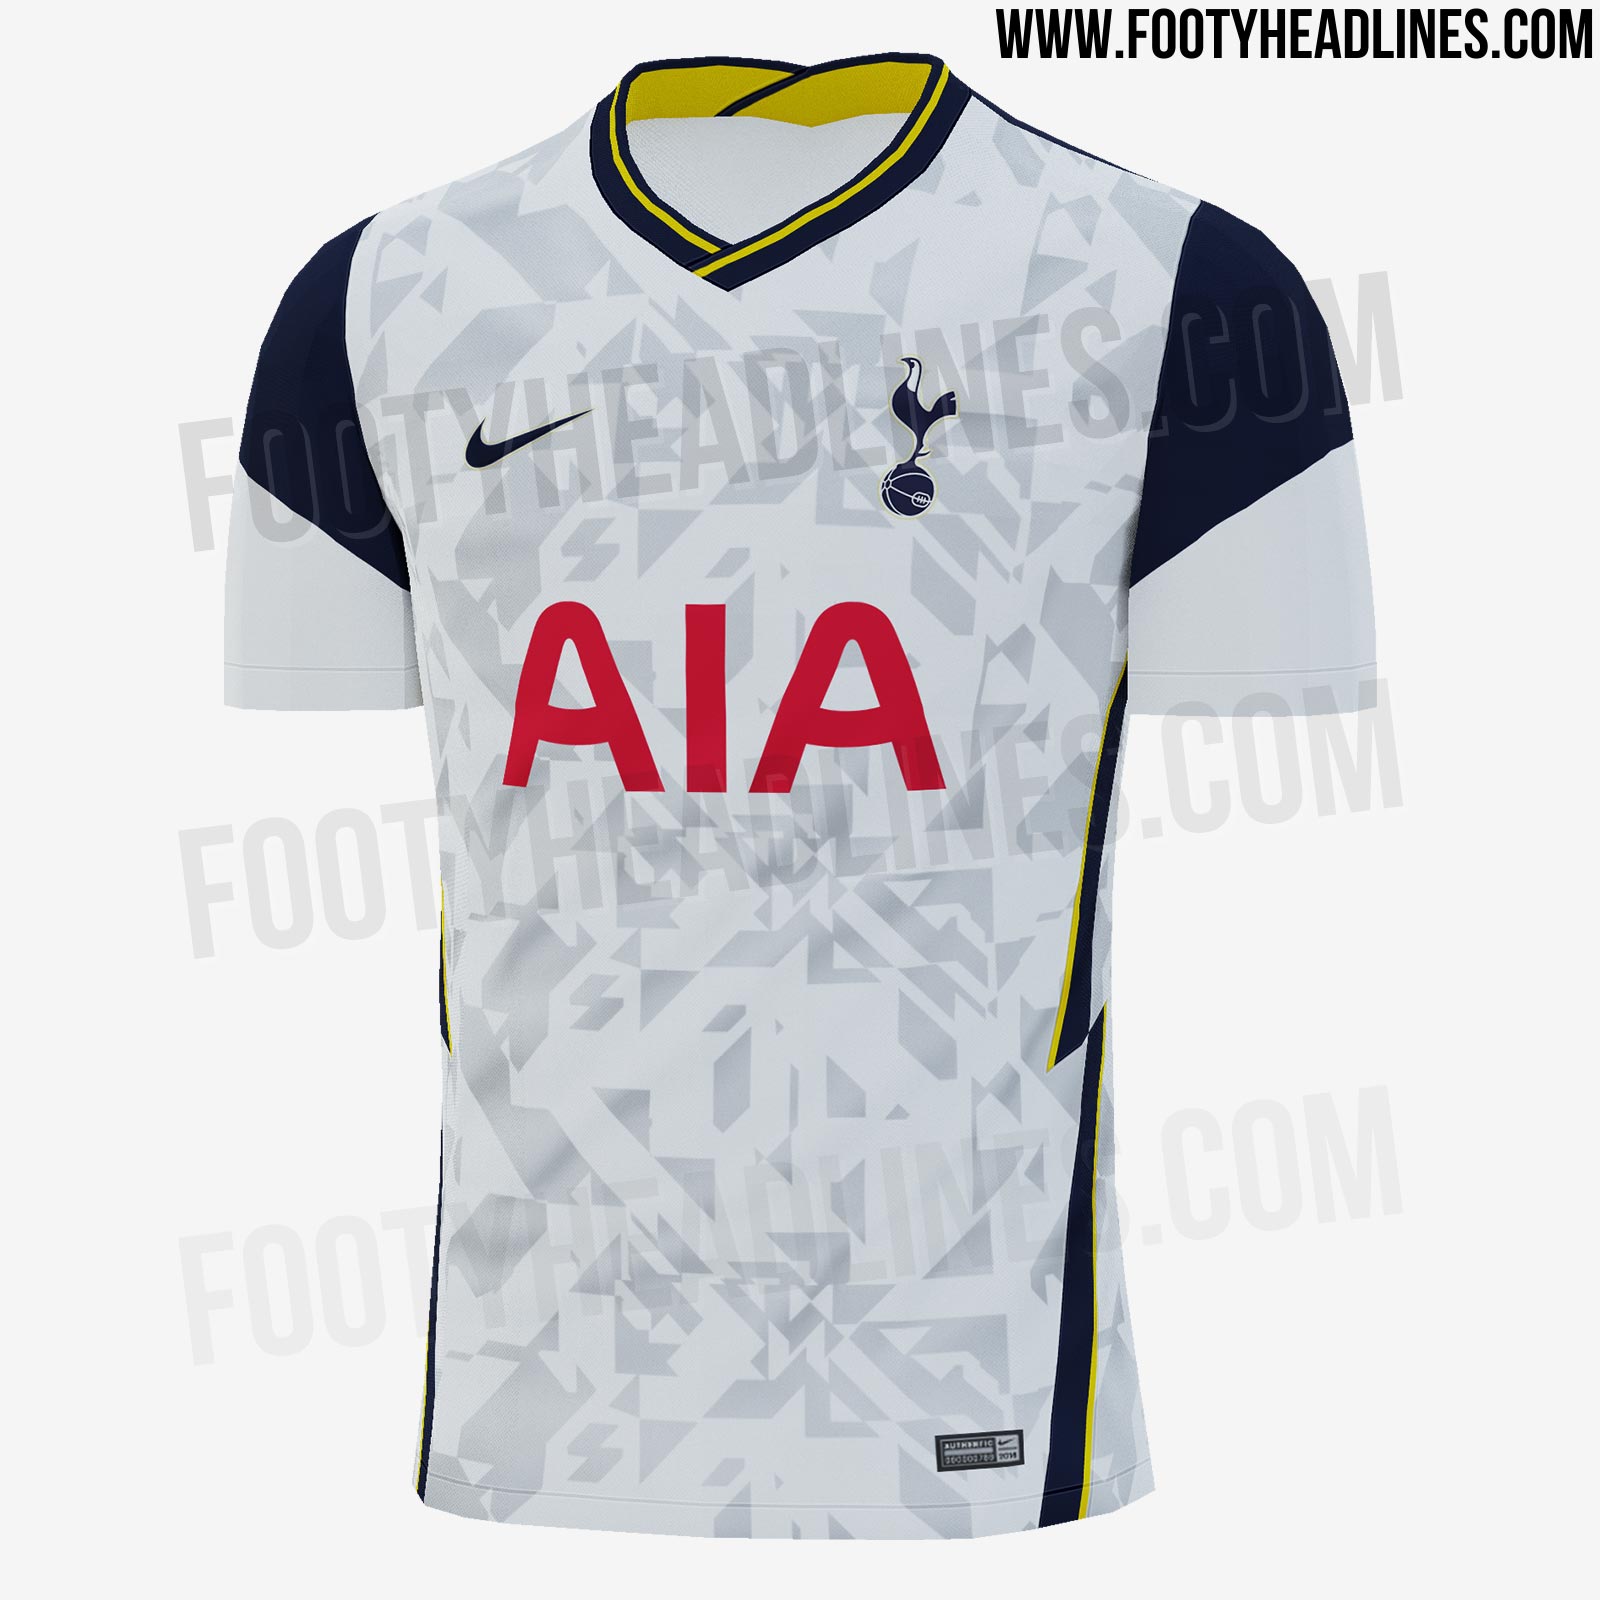 Chris Cowlin on X: LEAKED KITS: Tottenham's home, away and third